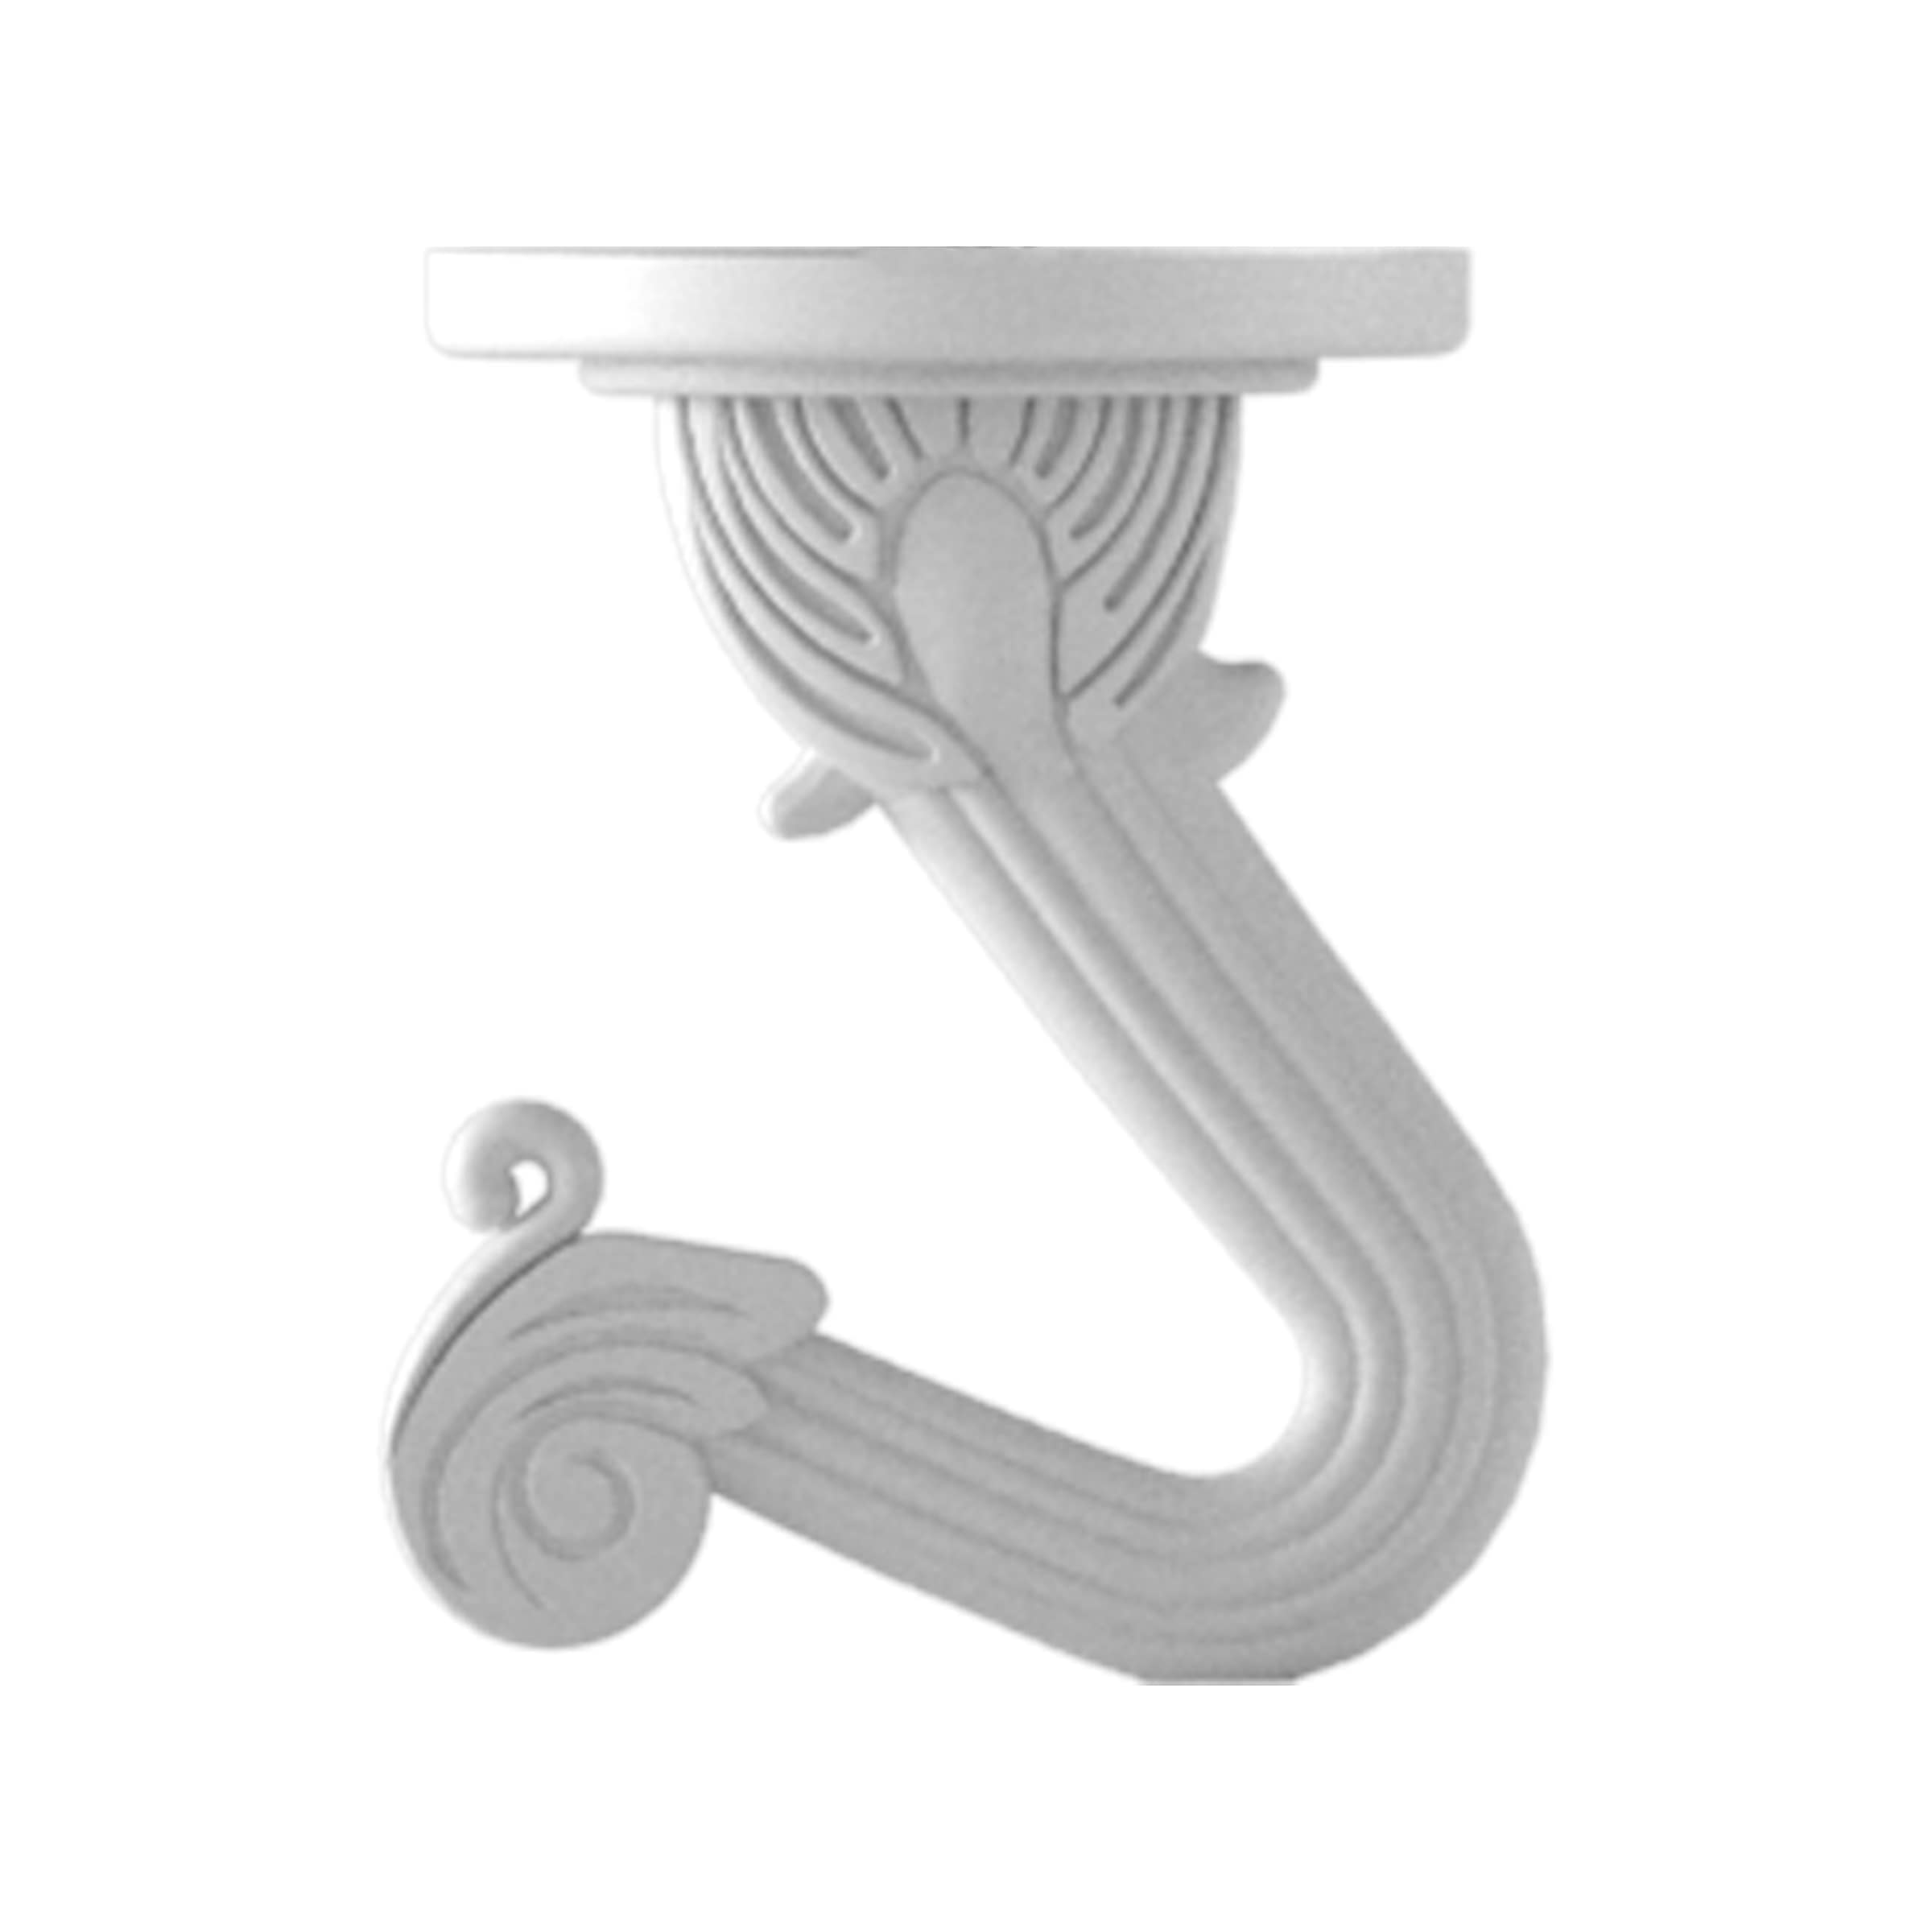 White Decorative Hooks For Hanging Plants - Pack Of 2 Metal Plant